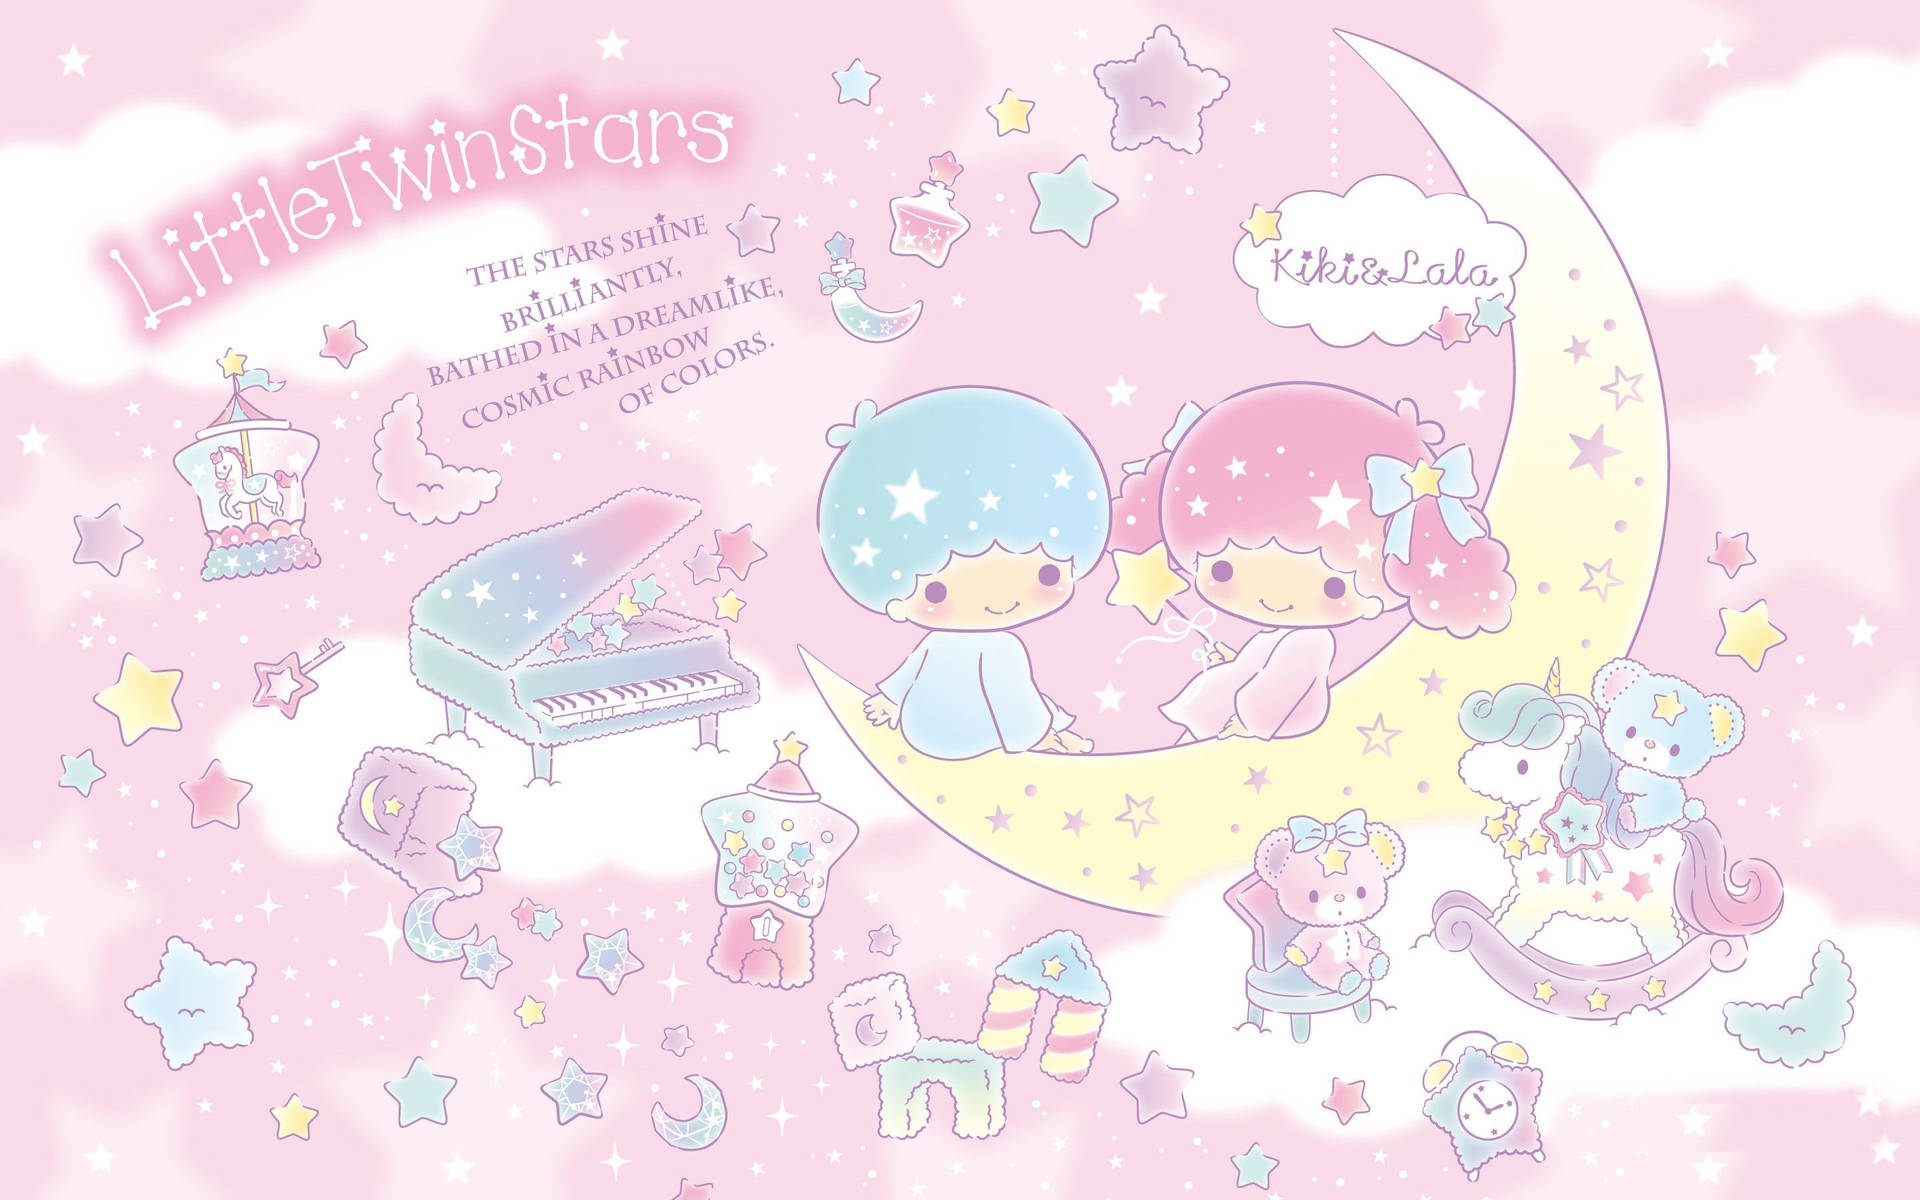 Get Kawaii-fied With This Stylish Laptop From Kawaii Laptop! Wallpaper